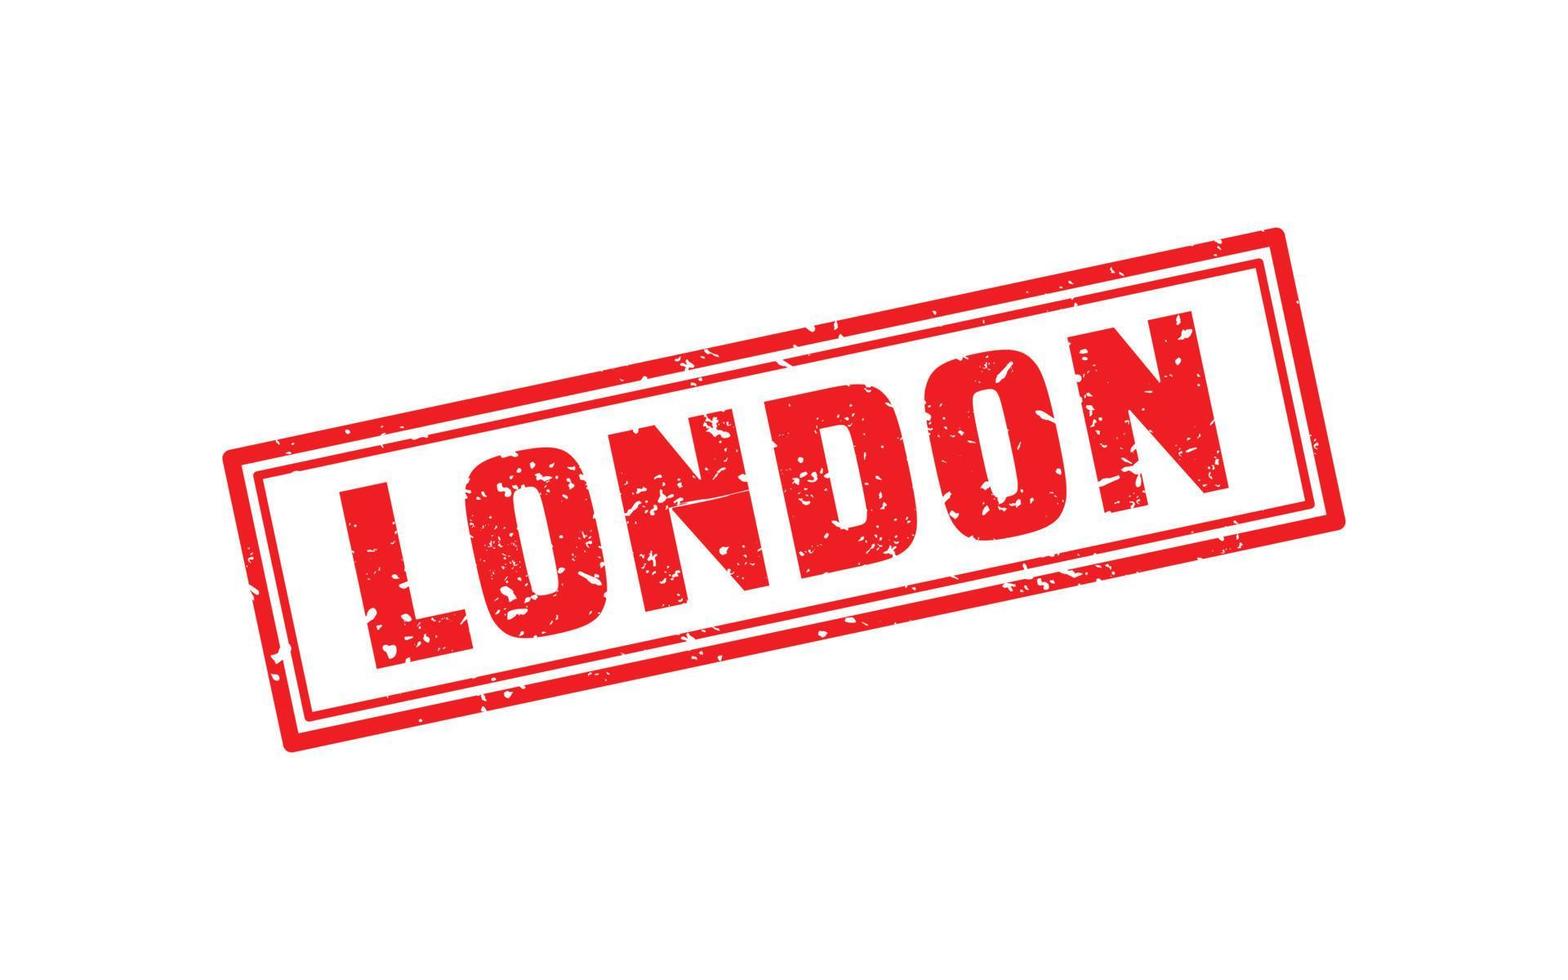 LONDON rubber stamp texture with grunge style on white background vector